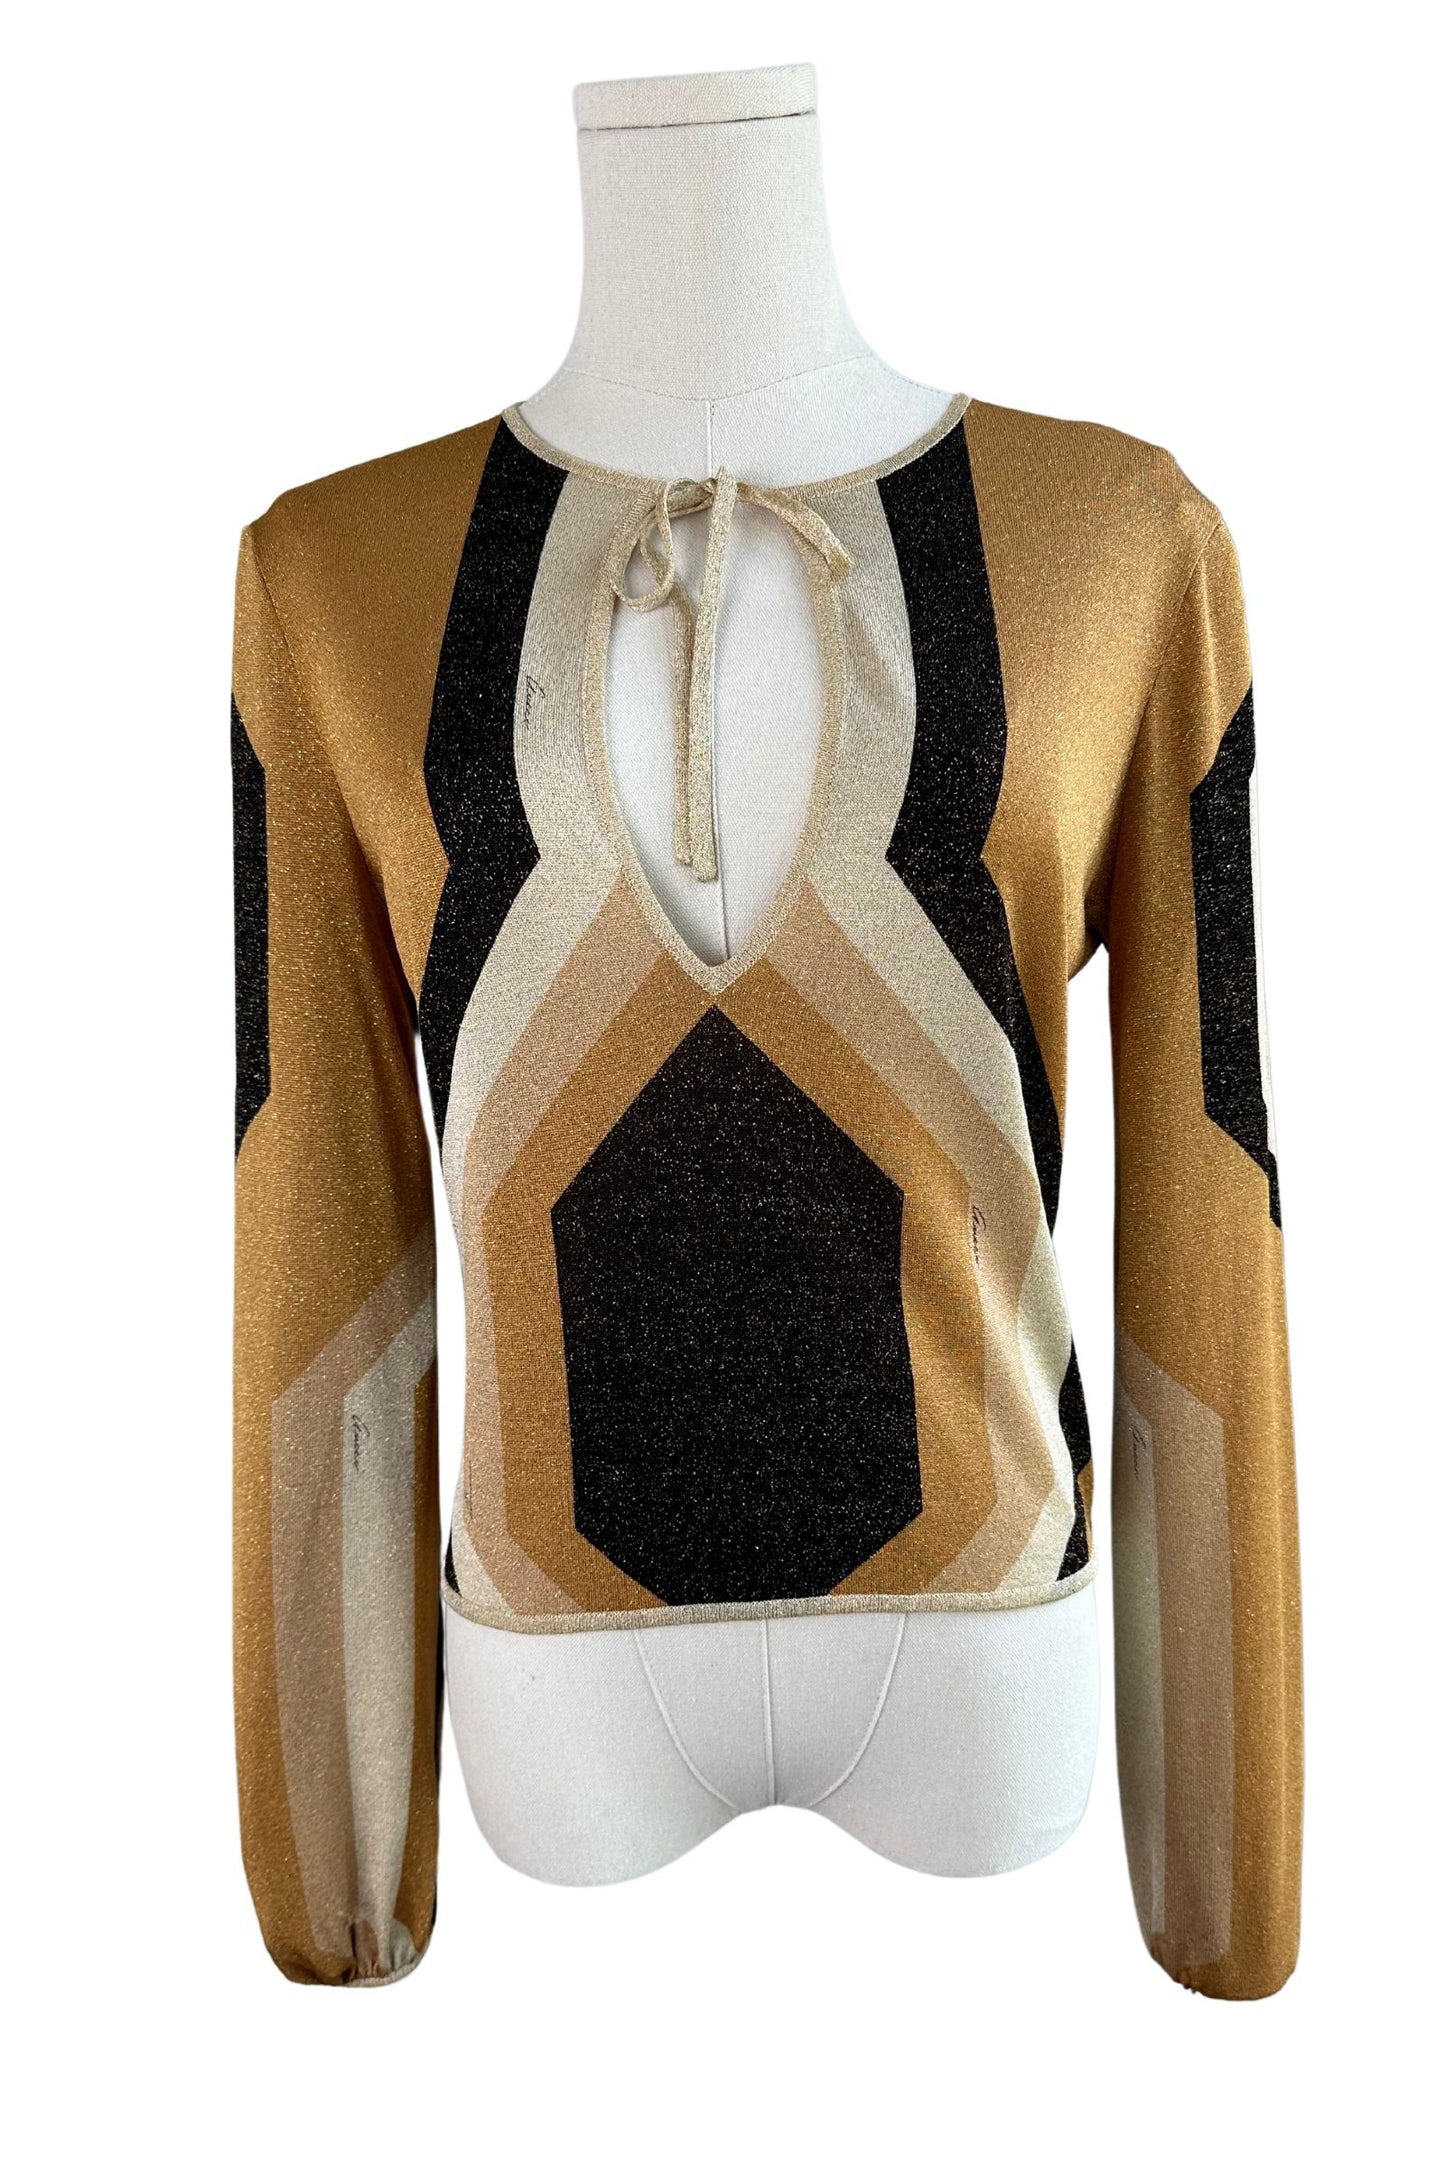 Gucci by Tom Ford F/W 2000 Collection Neutral Toned Kaleidoscope Metallic Lurex Knit Tie Front Blouse Size Small